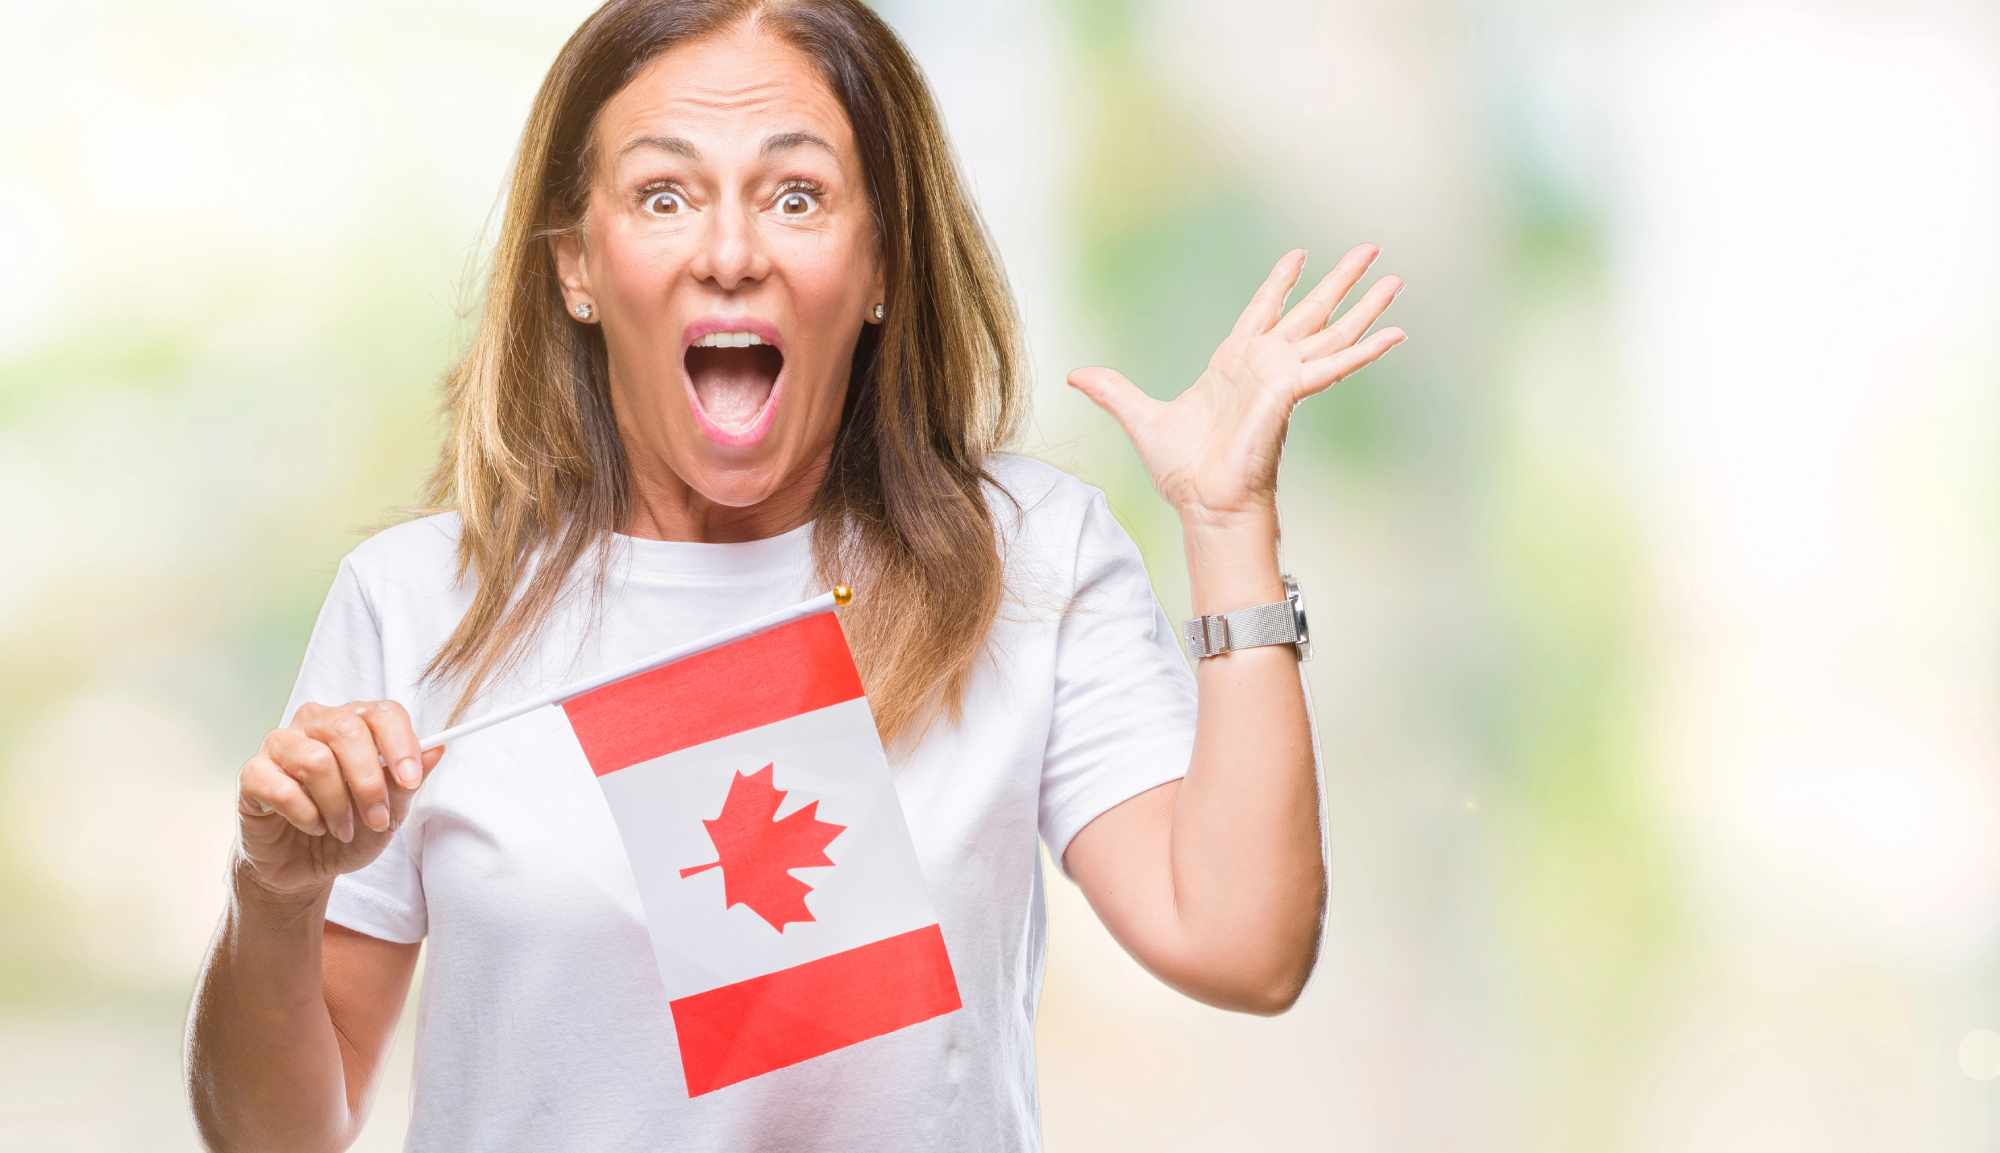 Canadian woman holding a flag and looking happy